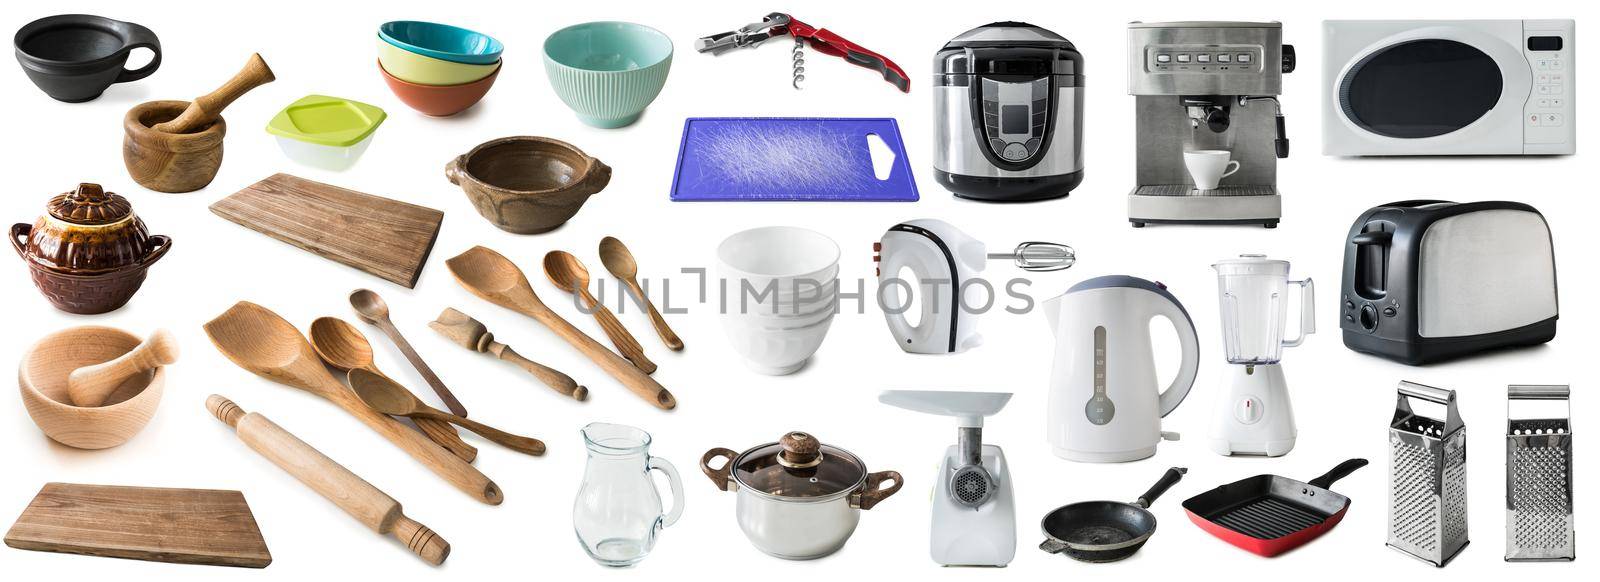 collage of many different kitchenware isolated on a whire background